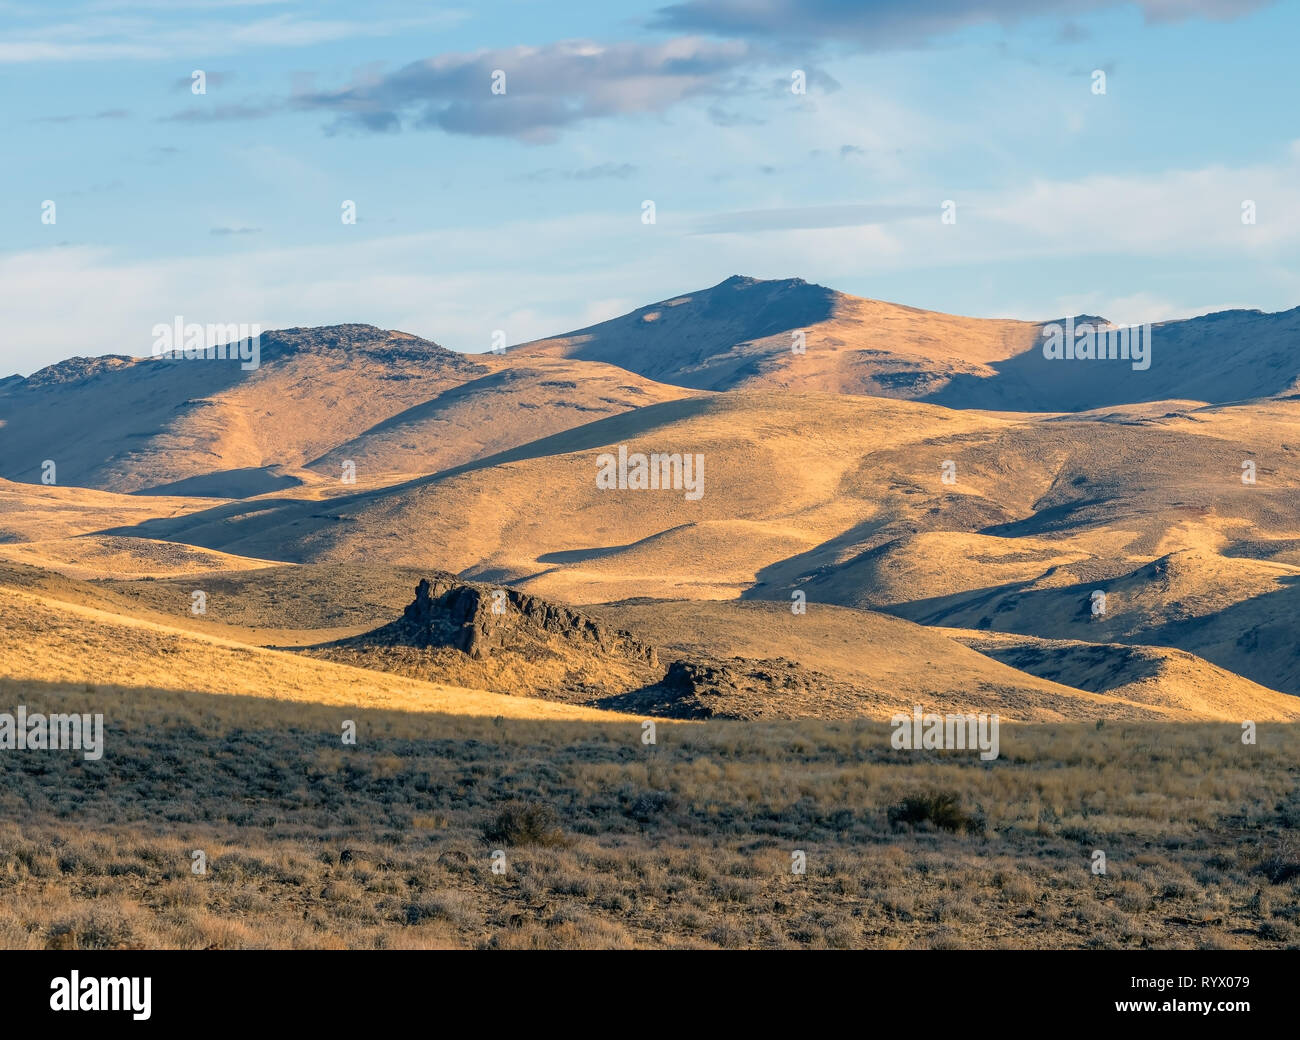 Arid dry desert landscape in Northern Nevada with rolling hills. Stock Photo